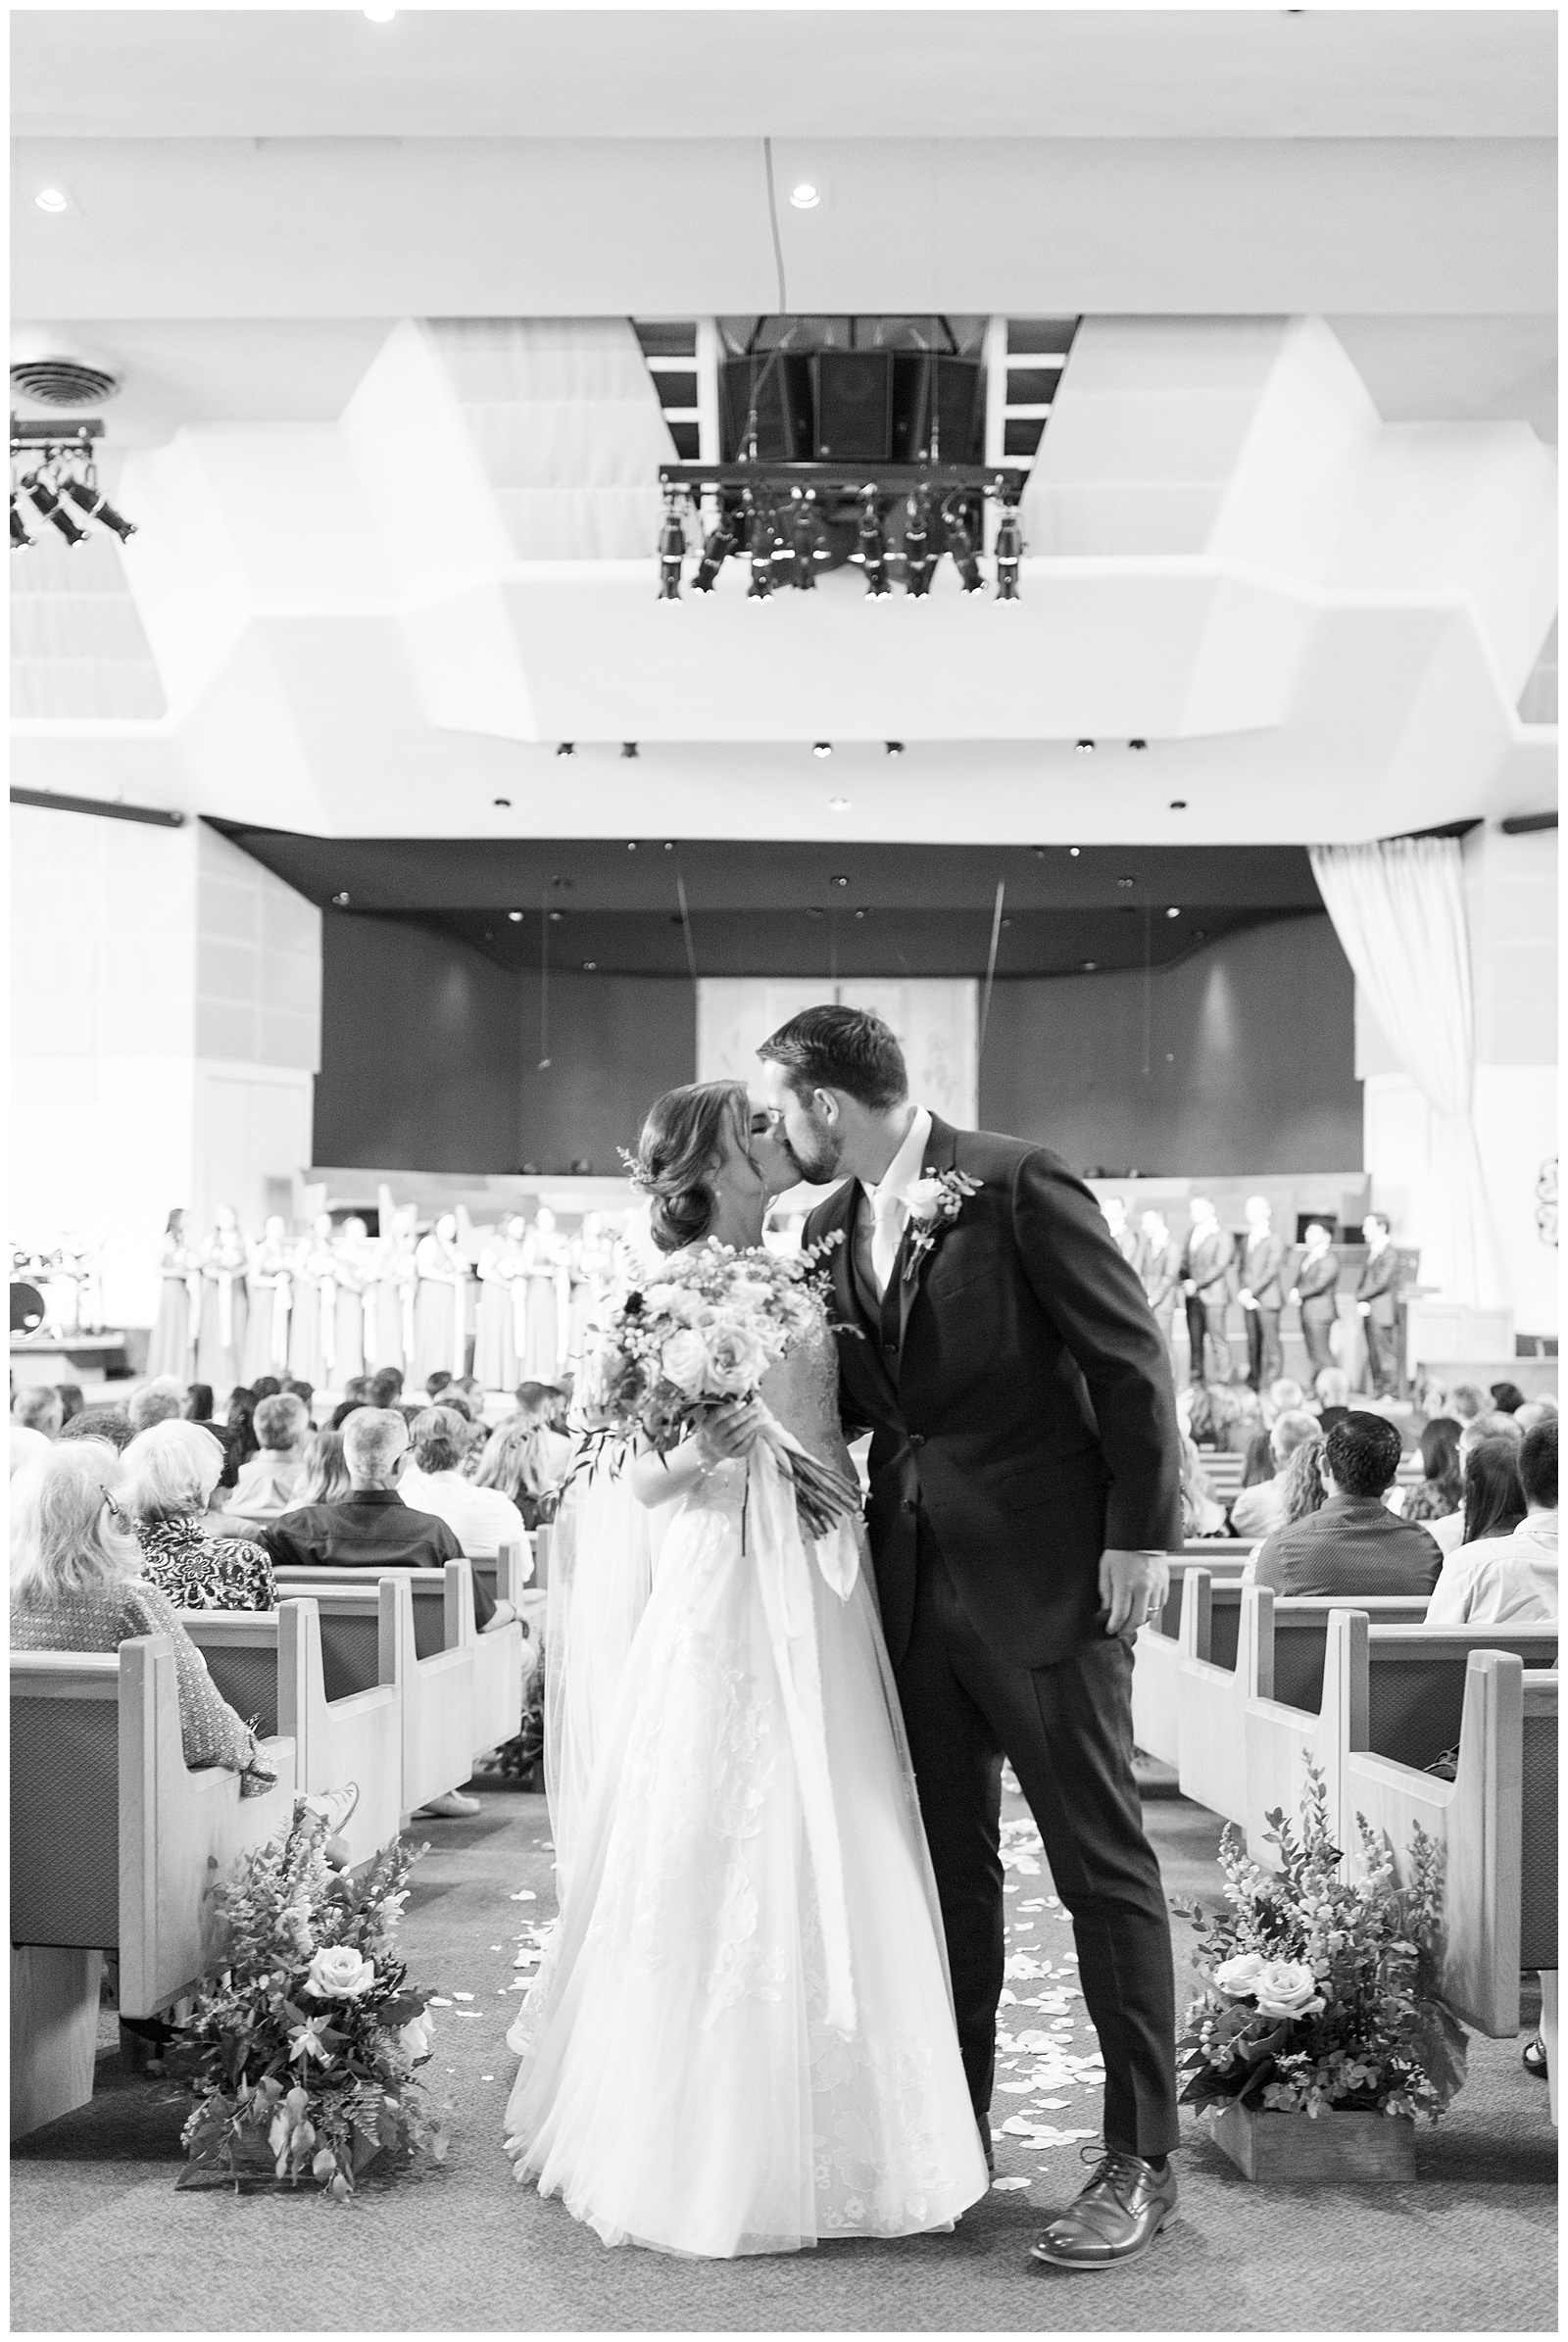 black and white image bride and groom kissing at end of aisle church wedding ceremony